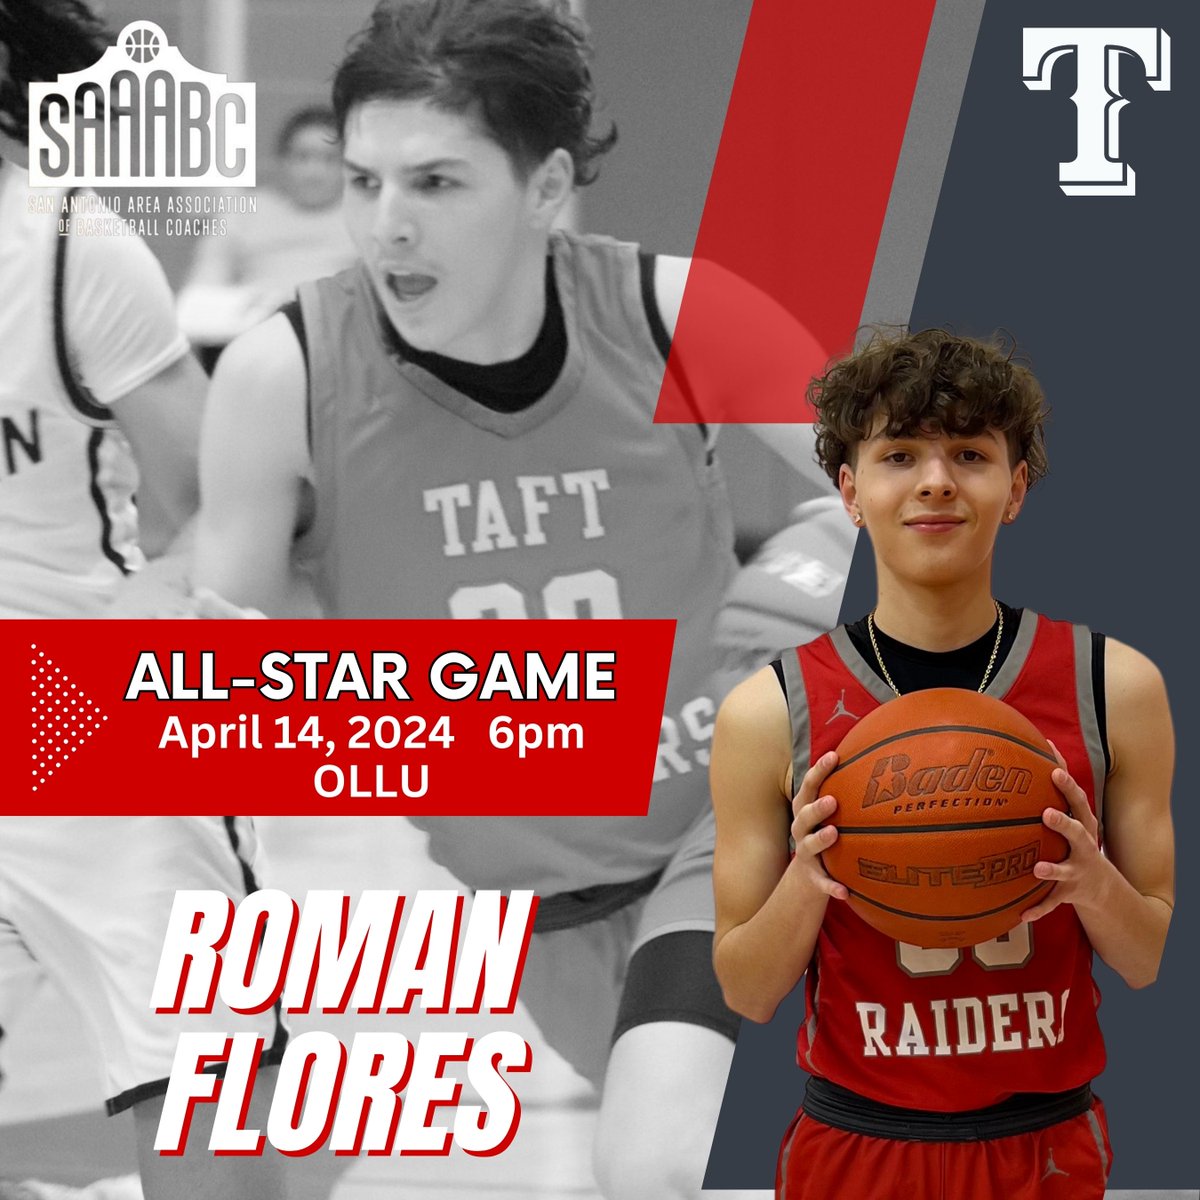 ⭐️ALL-STAR⭐️ Congratulations to @roman_flores6 for being named to the 23-24 @S3AHoopsCoaches All-Star Team‼️ Come out and support Roman this Sunday!!! 🗓️ April 14, 2024 ⌚️ 6:00pm 📍@OLLUnivSATX